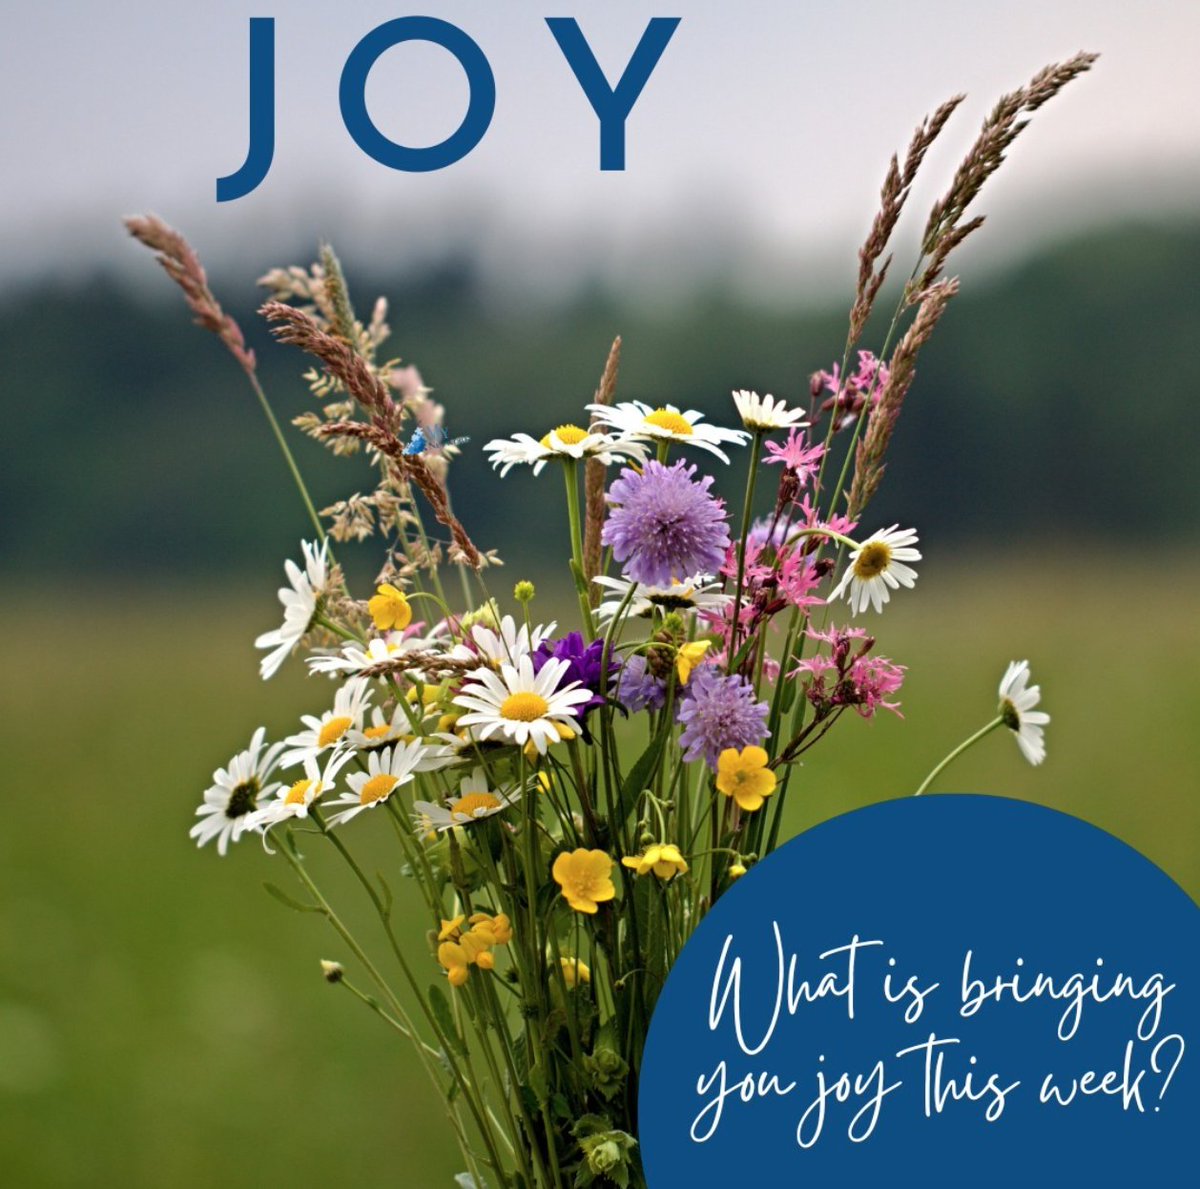 What is bringing you JOY this week?
WHERE have you found recharges & resets?
What has left you with pause and gratitude?

#MyNetwork #MyNetworkINS #WhatBringsYouJoy #MakeAJoyfulNoise #FindYourPause #IMPACT #InPurpose #OnPurpose #ForPurpose